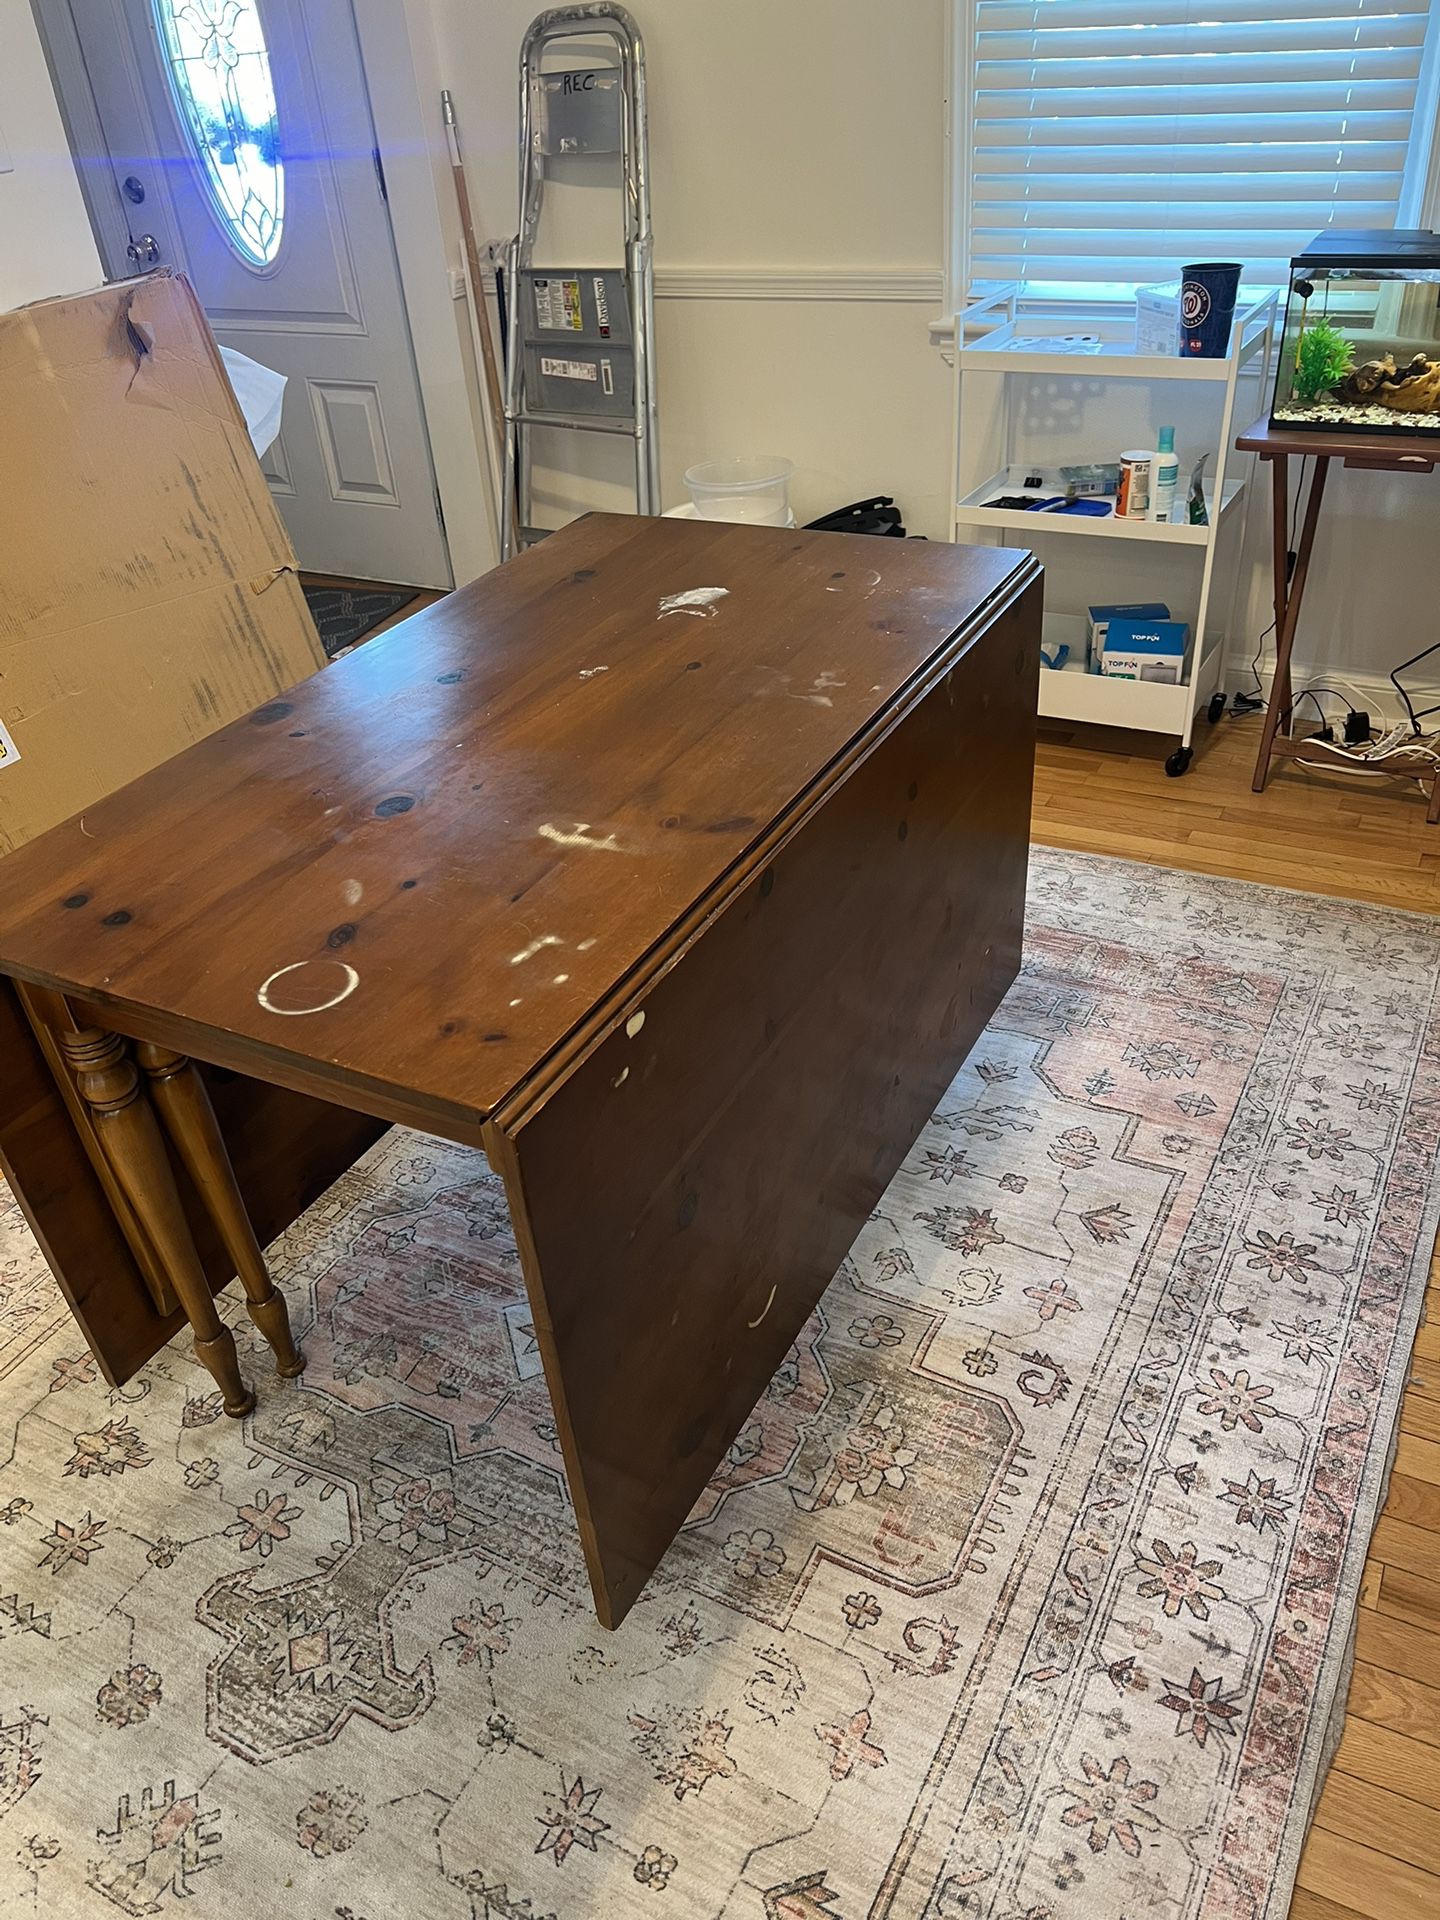 Dining Table Free for Pick Up